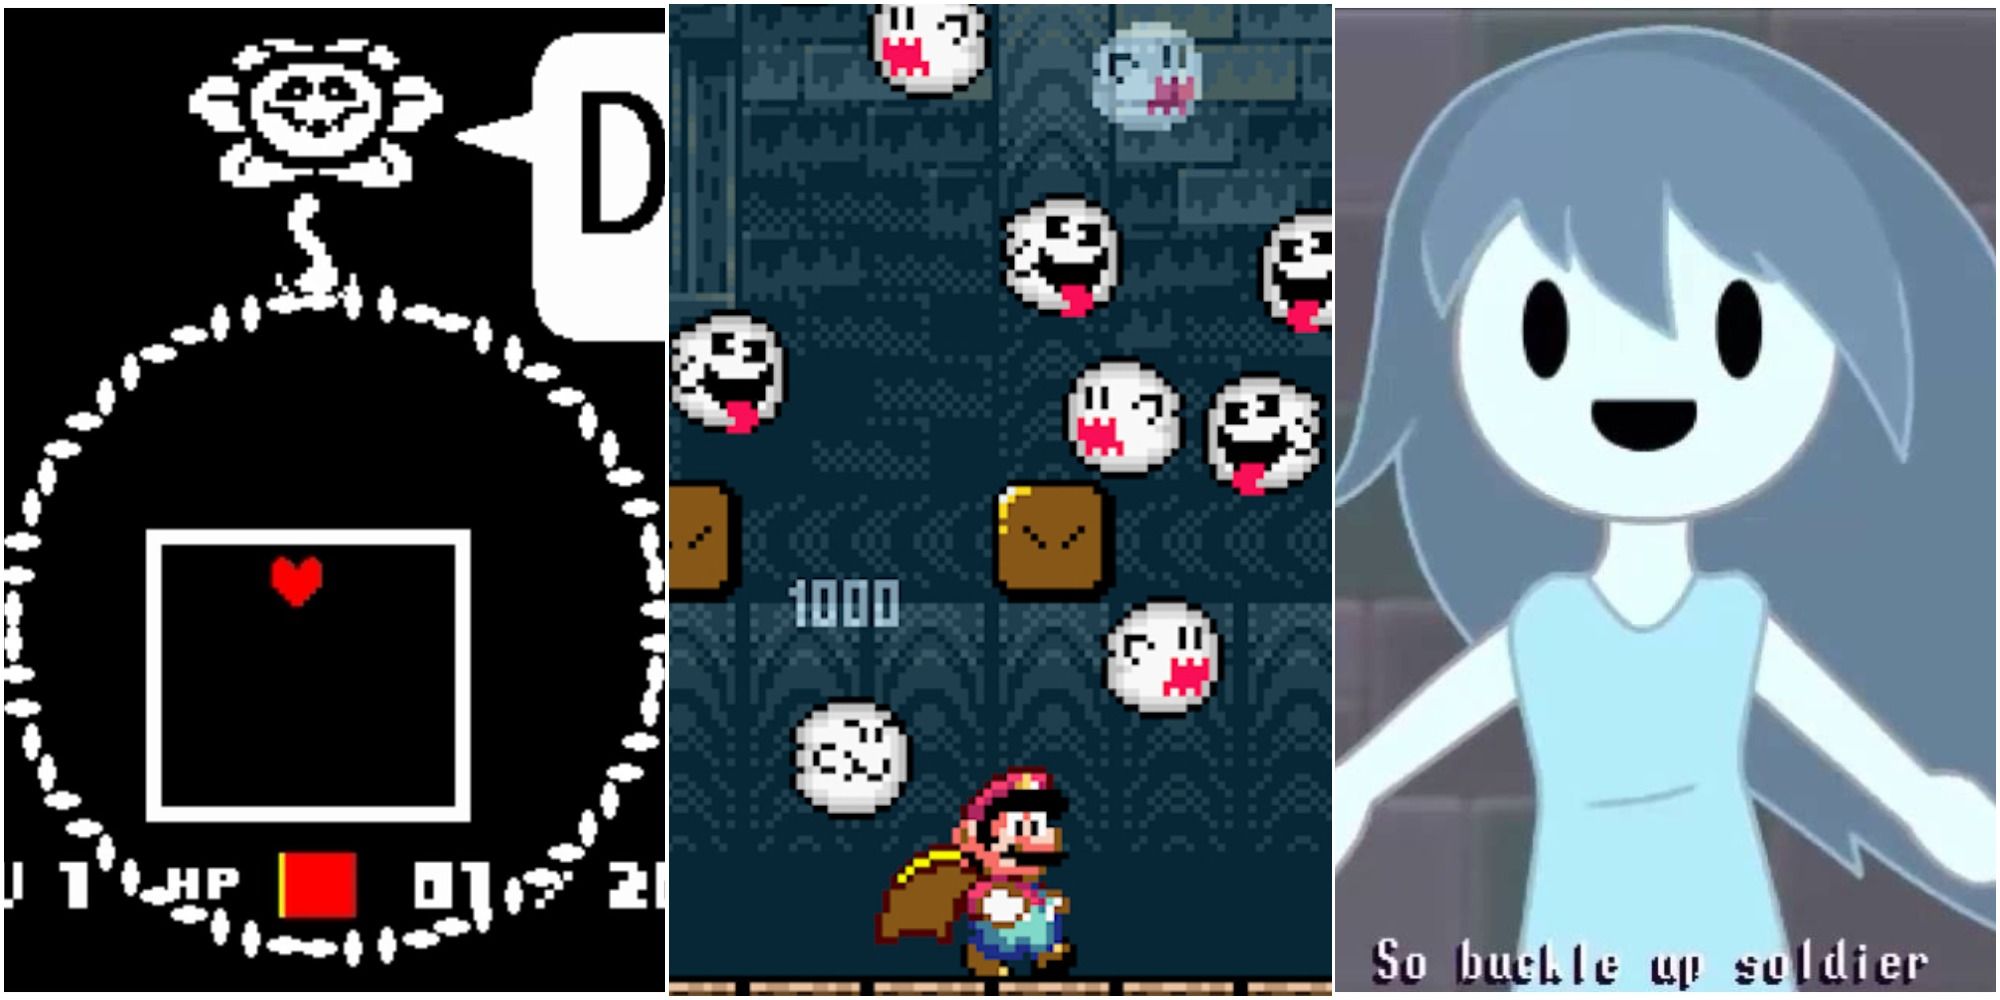 cute video game enemies from undertale, spokoy's house of jumpscares, and super mario